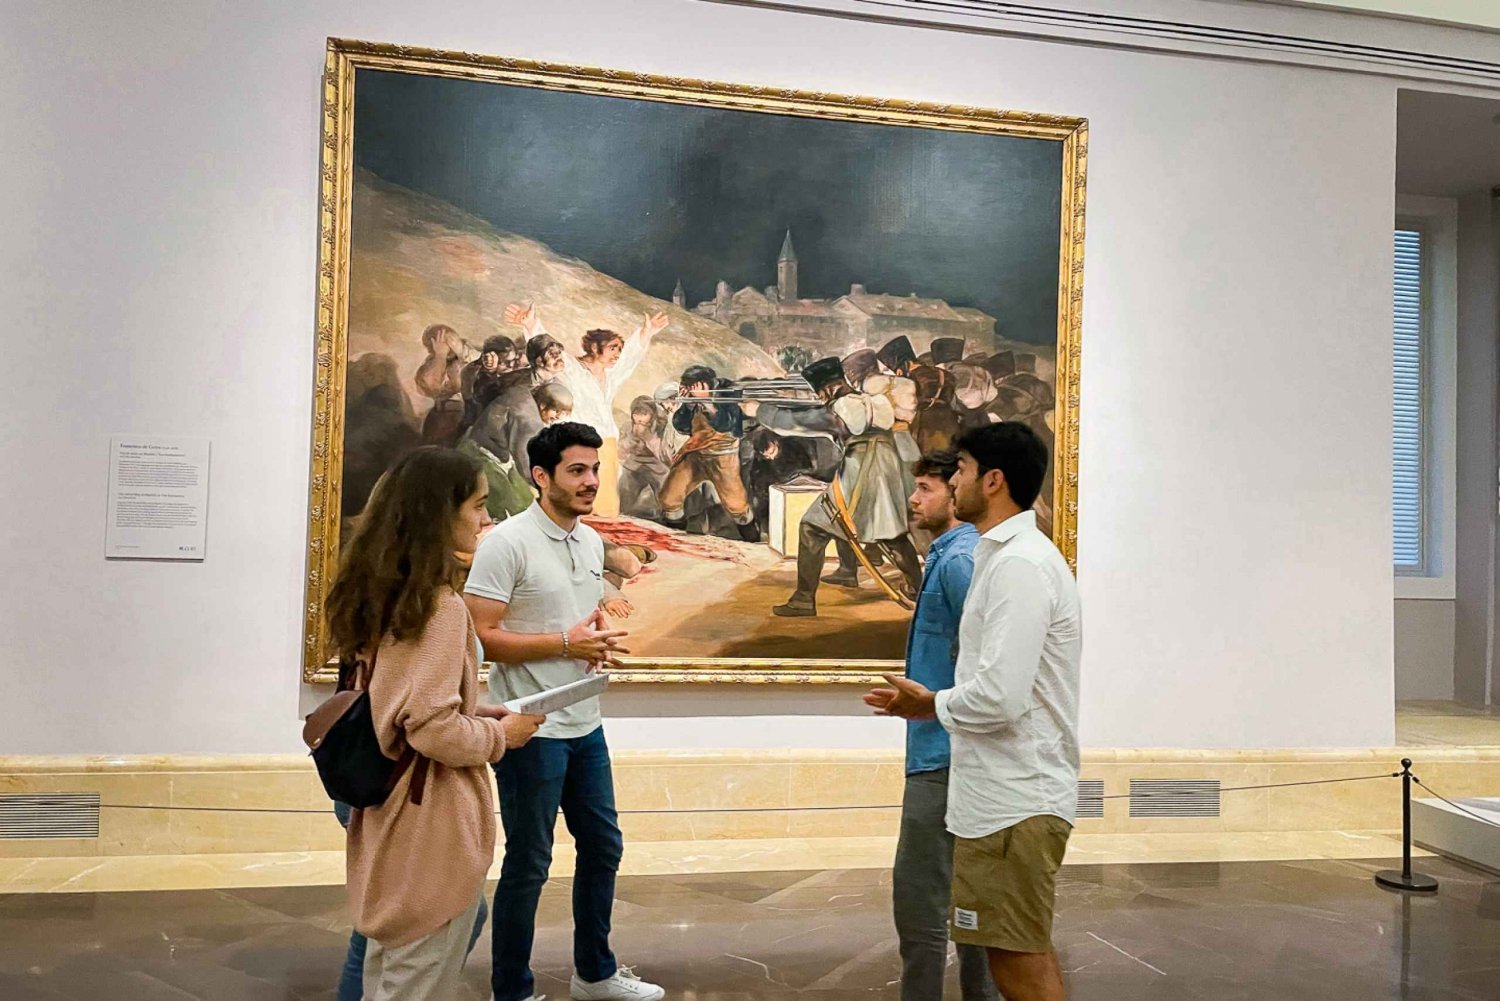 The Best of Madrid & Toledo in One Day (with Prado Museum)